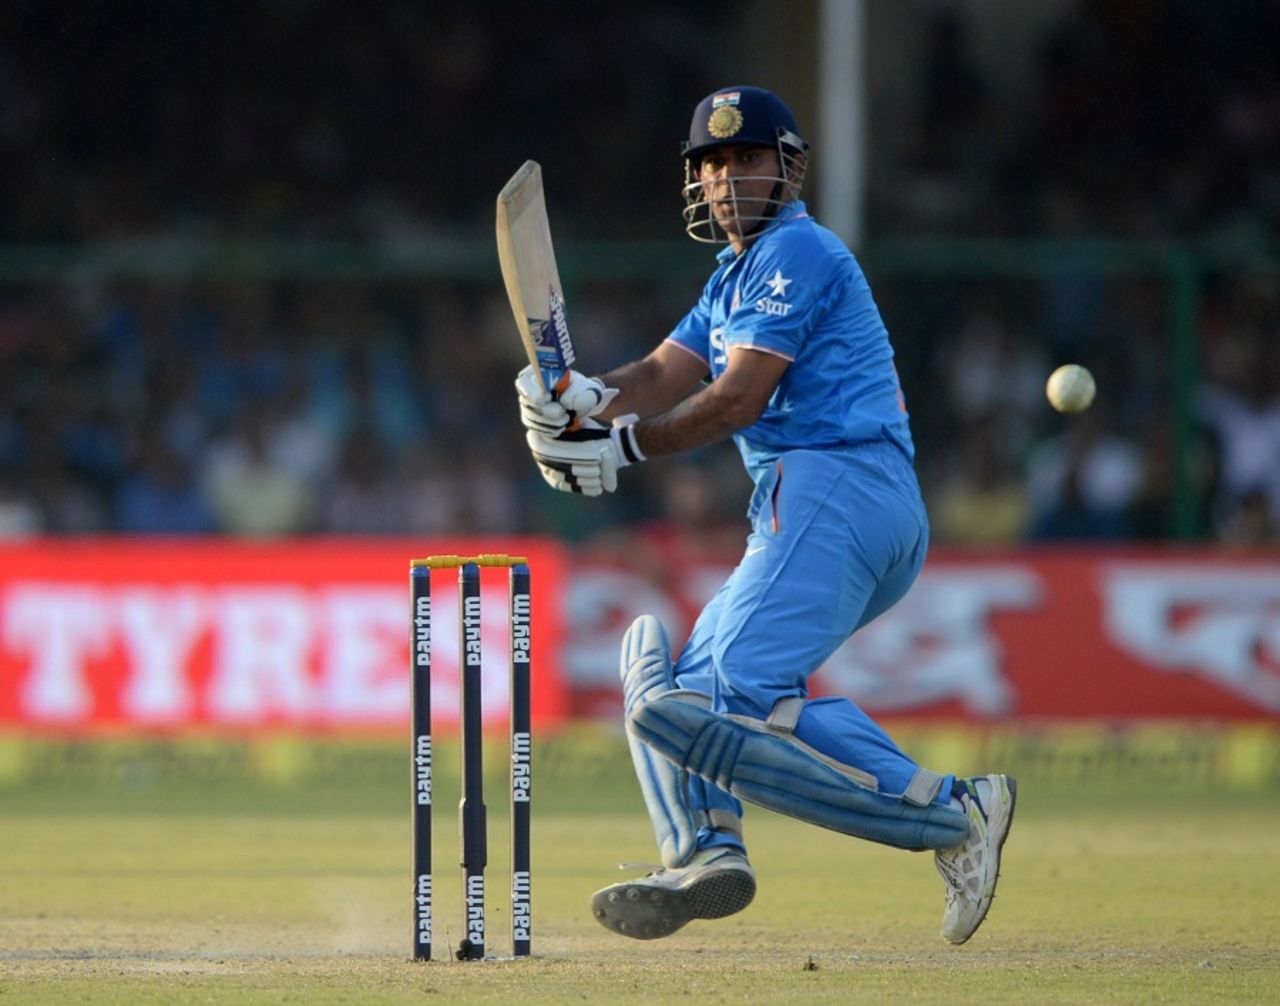 MS Dhoni scoops the ball fine, ndia v South Africa, 1st ODI, Kanpur, October 11, 2015